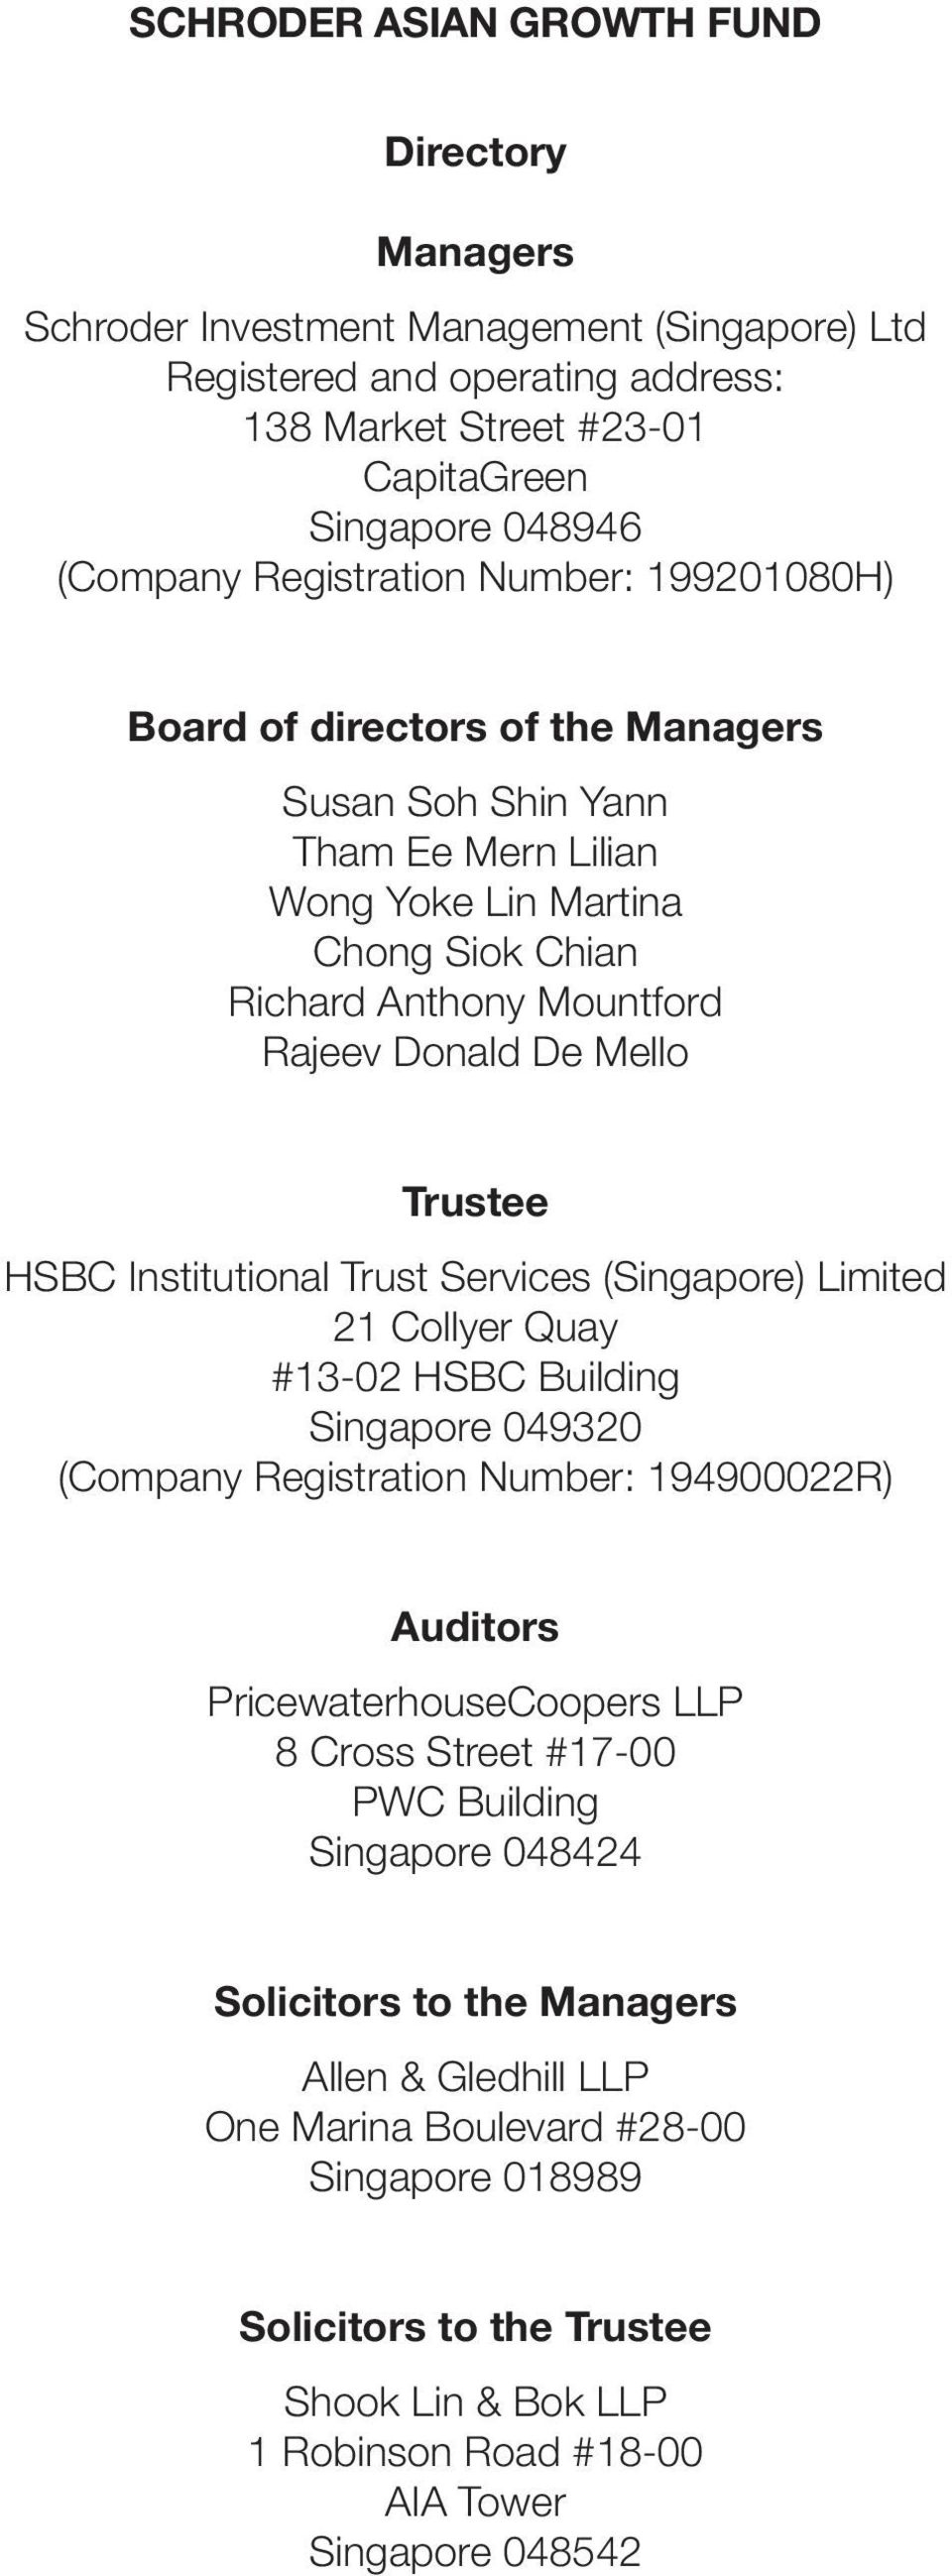 Trustee HSBC Institutional Trust Services (Singapore) Limited 21 Collyer Quay #13-02 HSBC Building Singapore 049320 (Company Registration Number: 194900022R) Auditors PricewaterhouseCoopers LLP 8